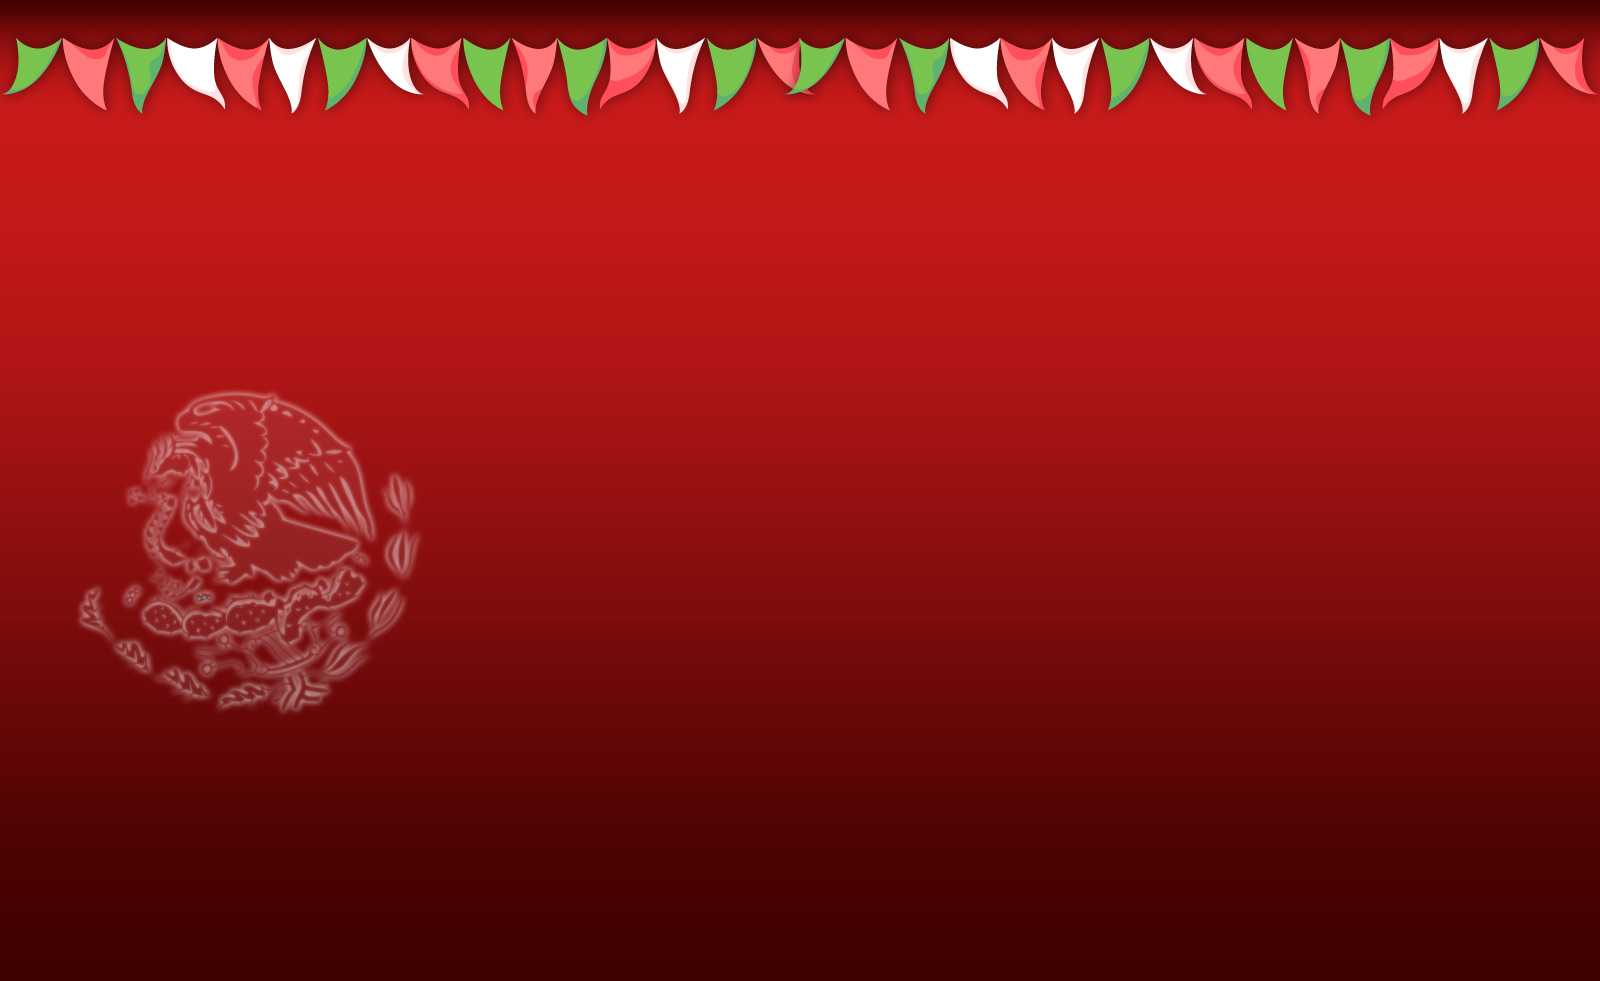 Mexican Fiesta Free Graphic Backgrounds For Powerpoint Templates Ppt Backgrounds